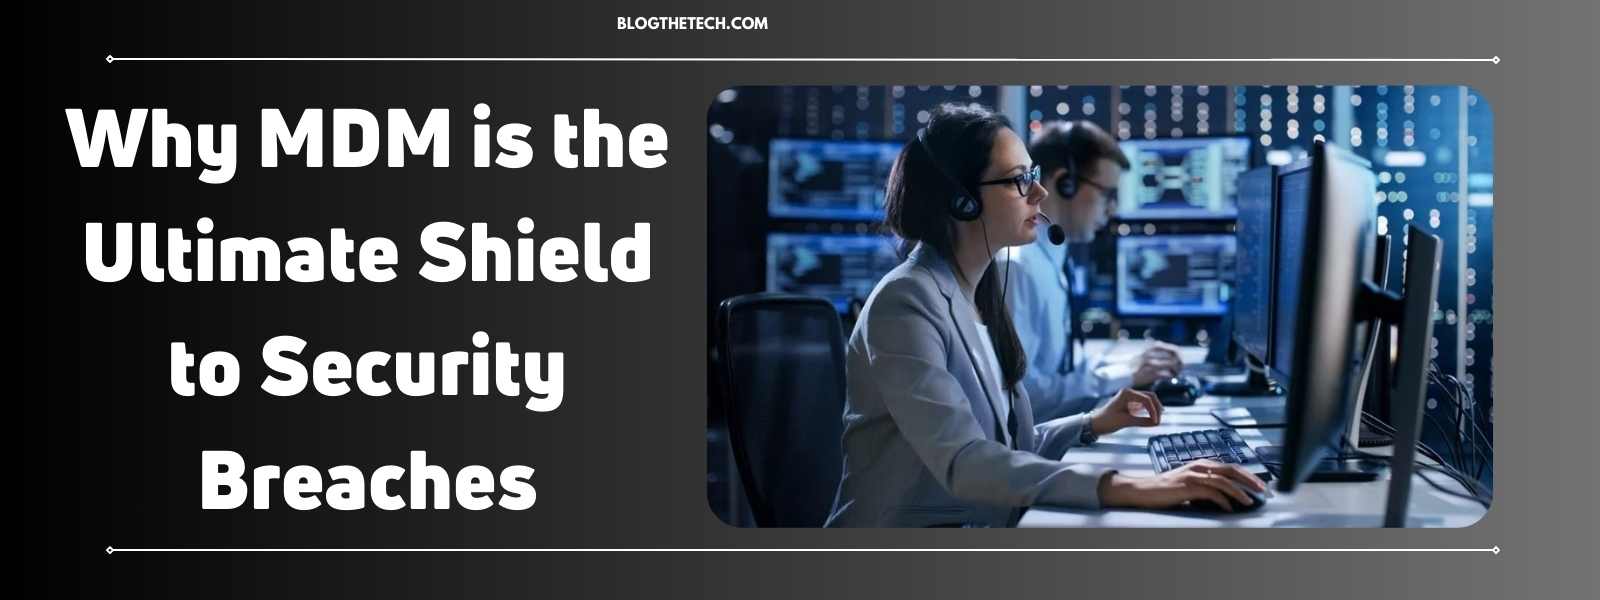 Why MDM is the Ultimate Shield to Security Breaches